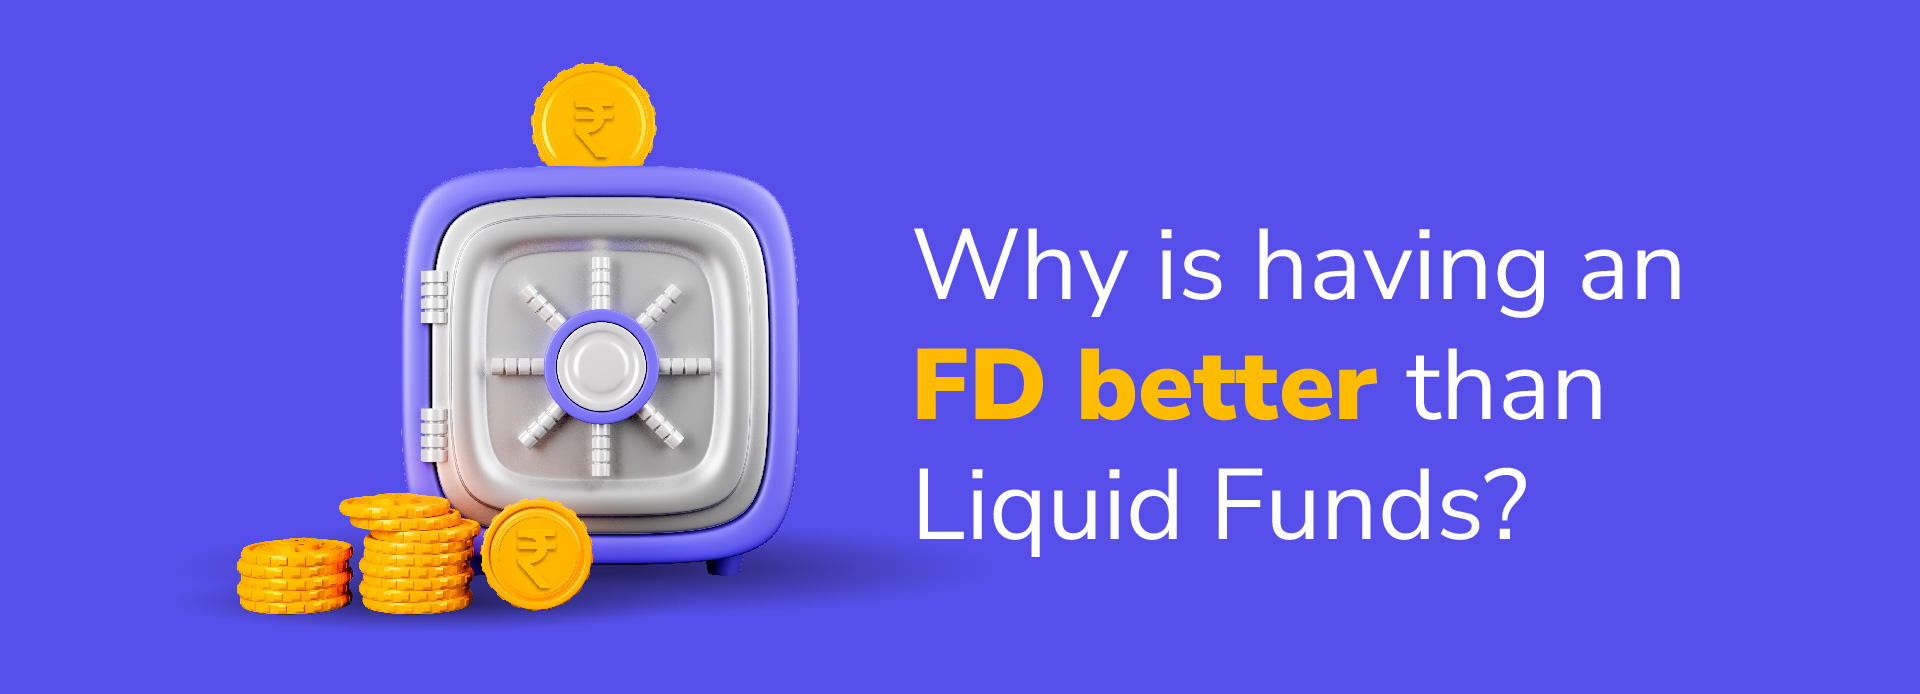 Why is having an FD better than Liquid Funds?